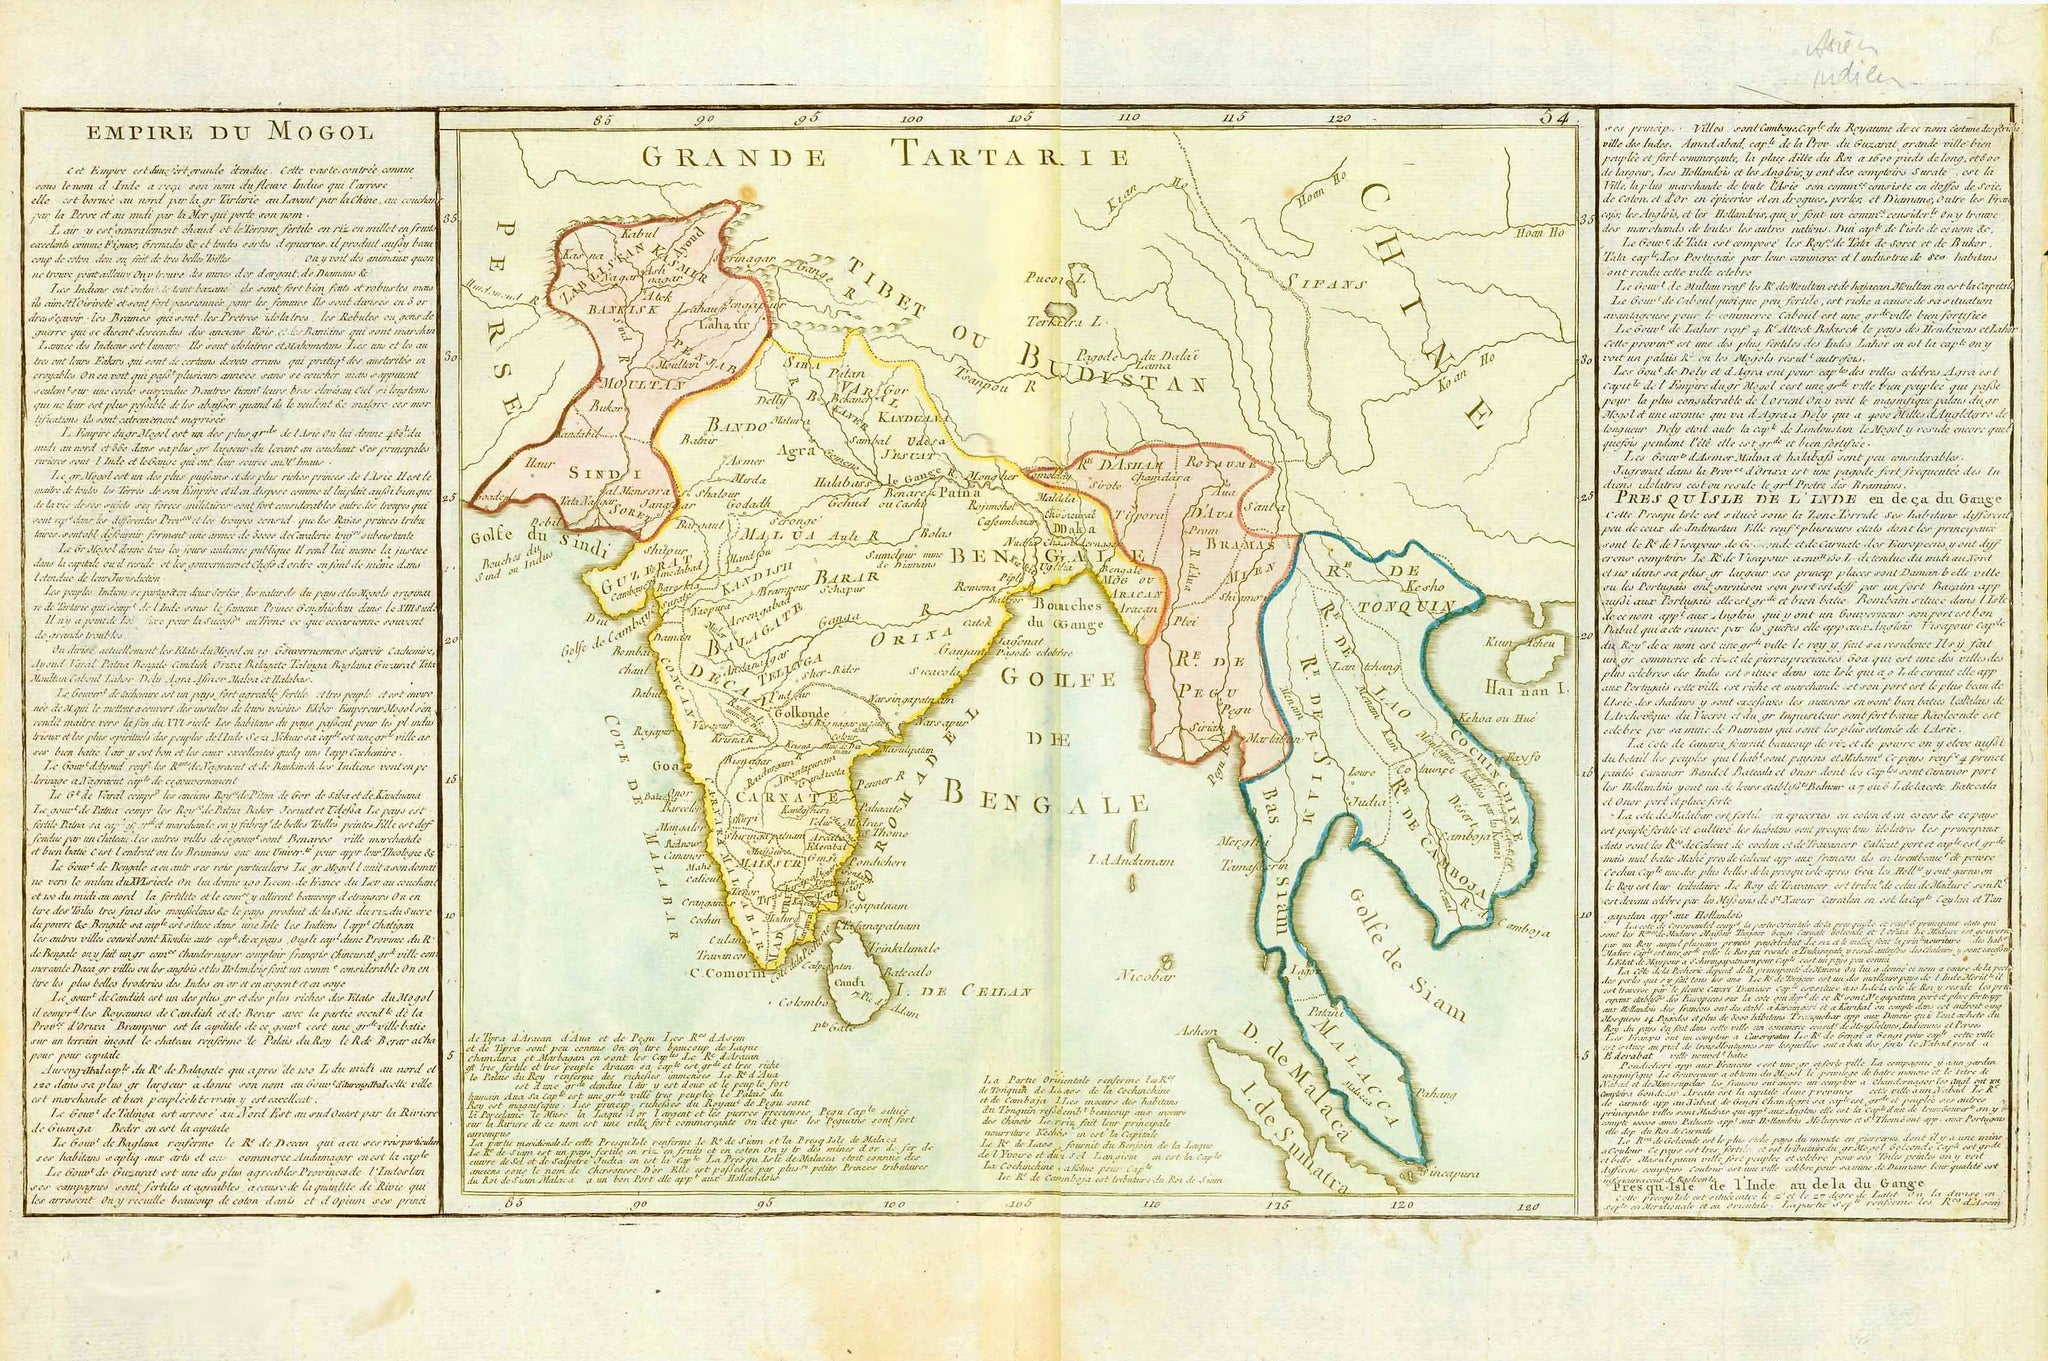 Map of India, Pakistan, Bangladesh, Burma, Myanmar, Thailand, Malaysia, Cambodia, "Empire Du Mogol"  Copper engraving map of Asia by Jean Baptise Louis Clouet. Published 1787 in Paris. Published in "Geographie modern avec une introduction"  On both side of the map is detailed information about the many ports and geography of Asia.  Original antique print , interior design, wall decoration, ideas, idea, gift ideas, present, vintage, charming, special, decoration, home interior, living room design